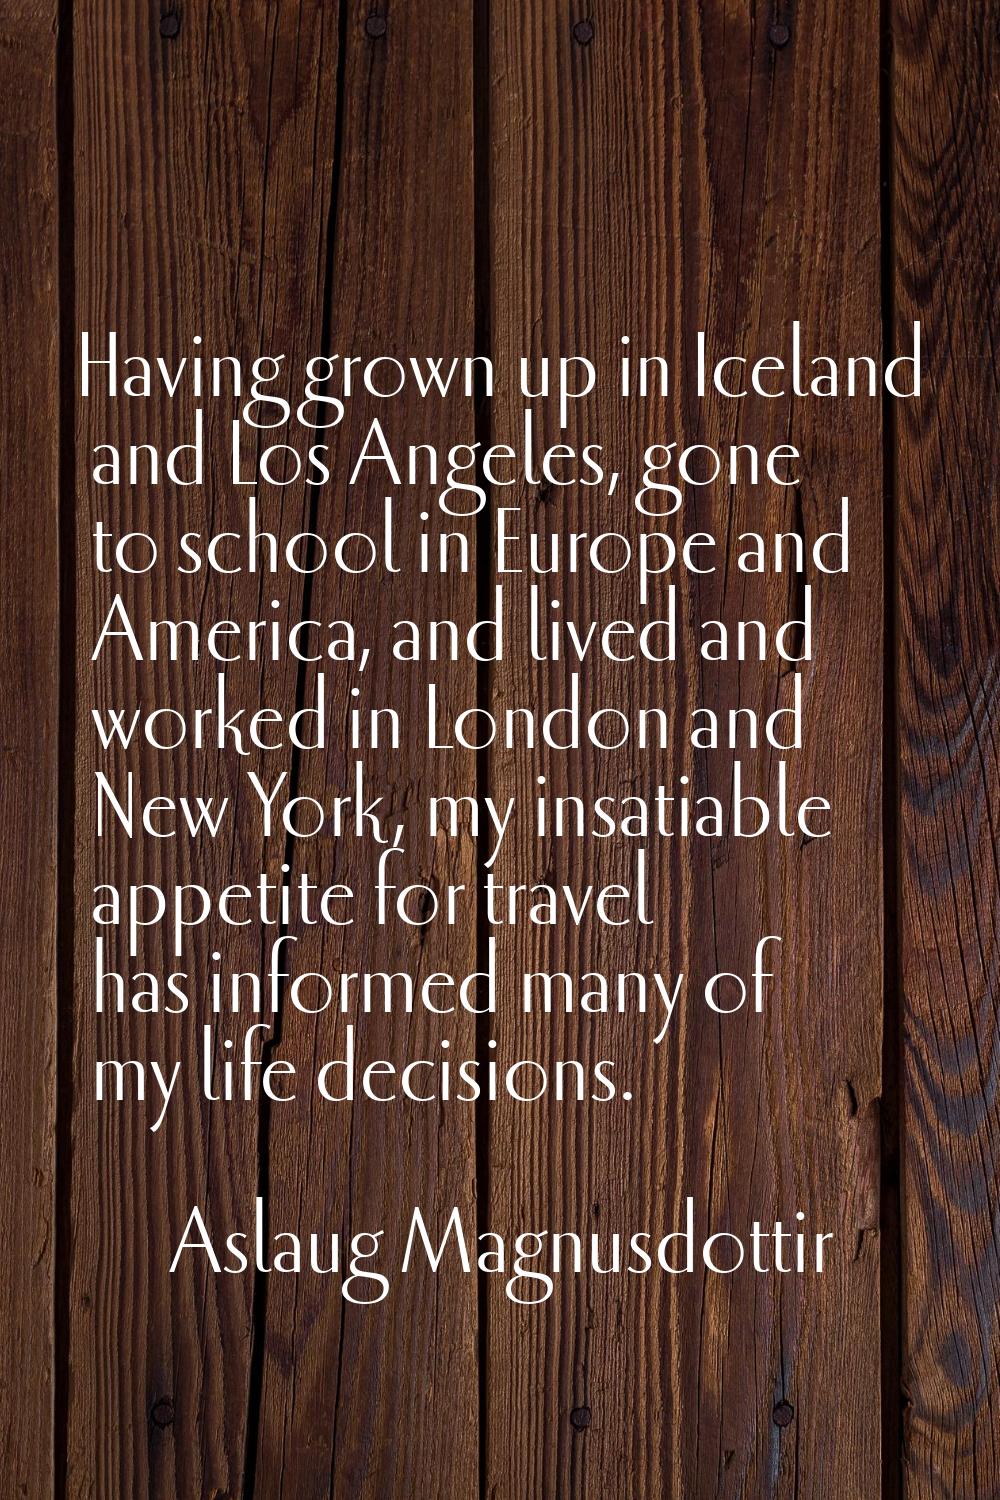 Having grown up in Iceland and Los Angeles, gone to school in Europe and America, and lived and wor